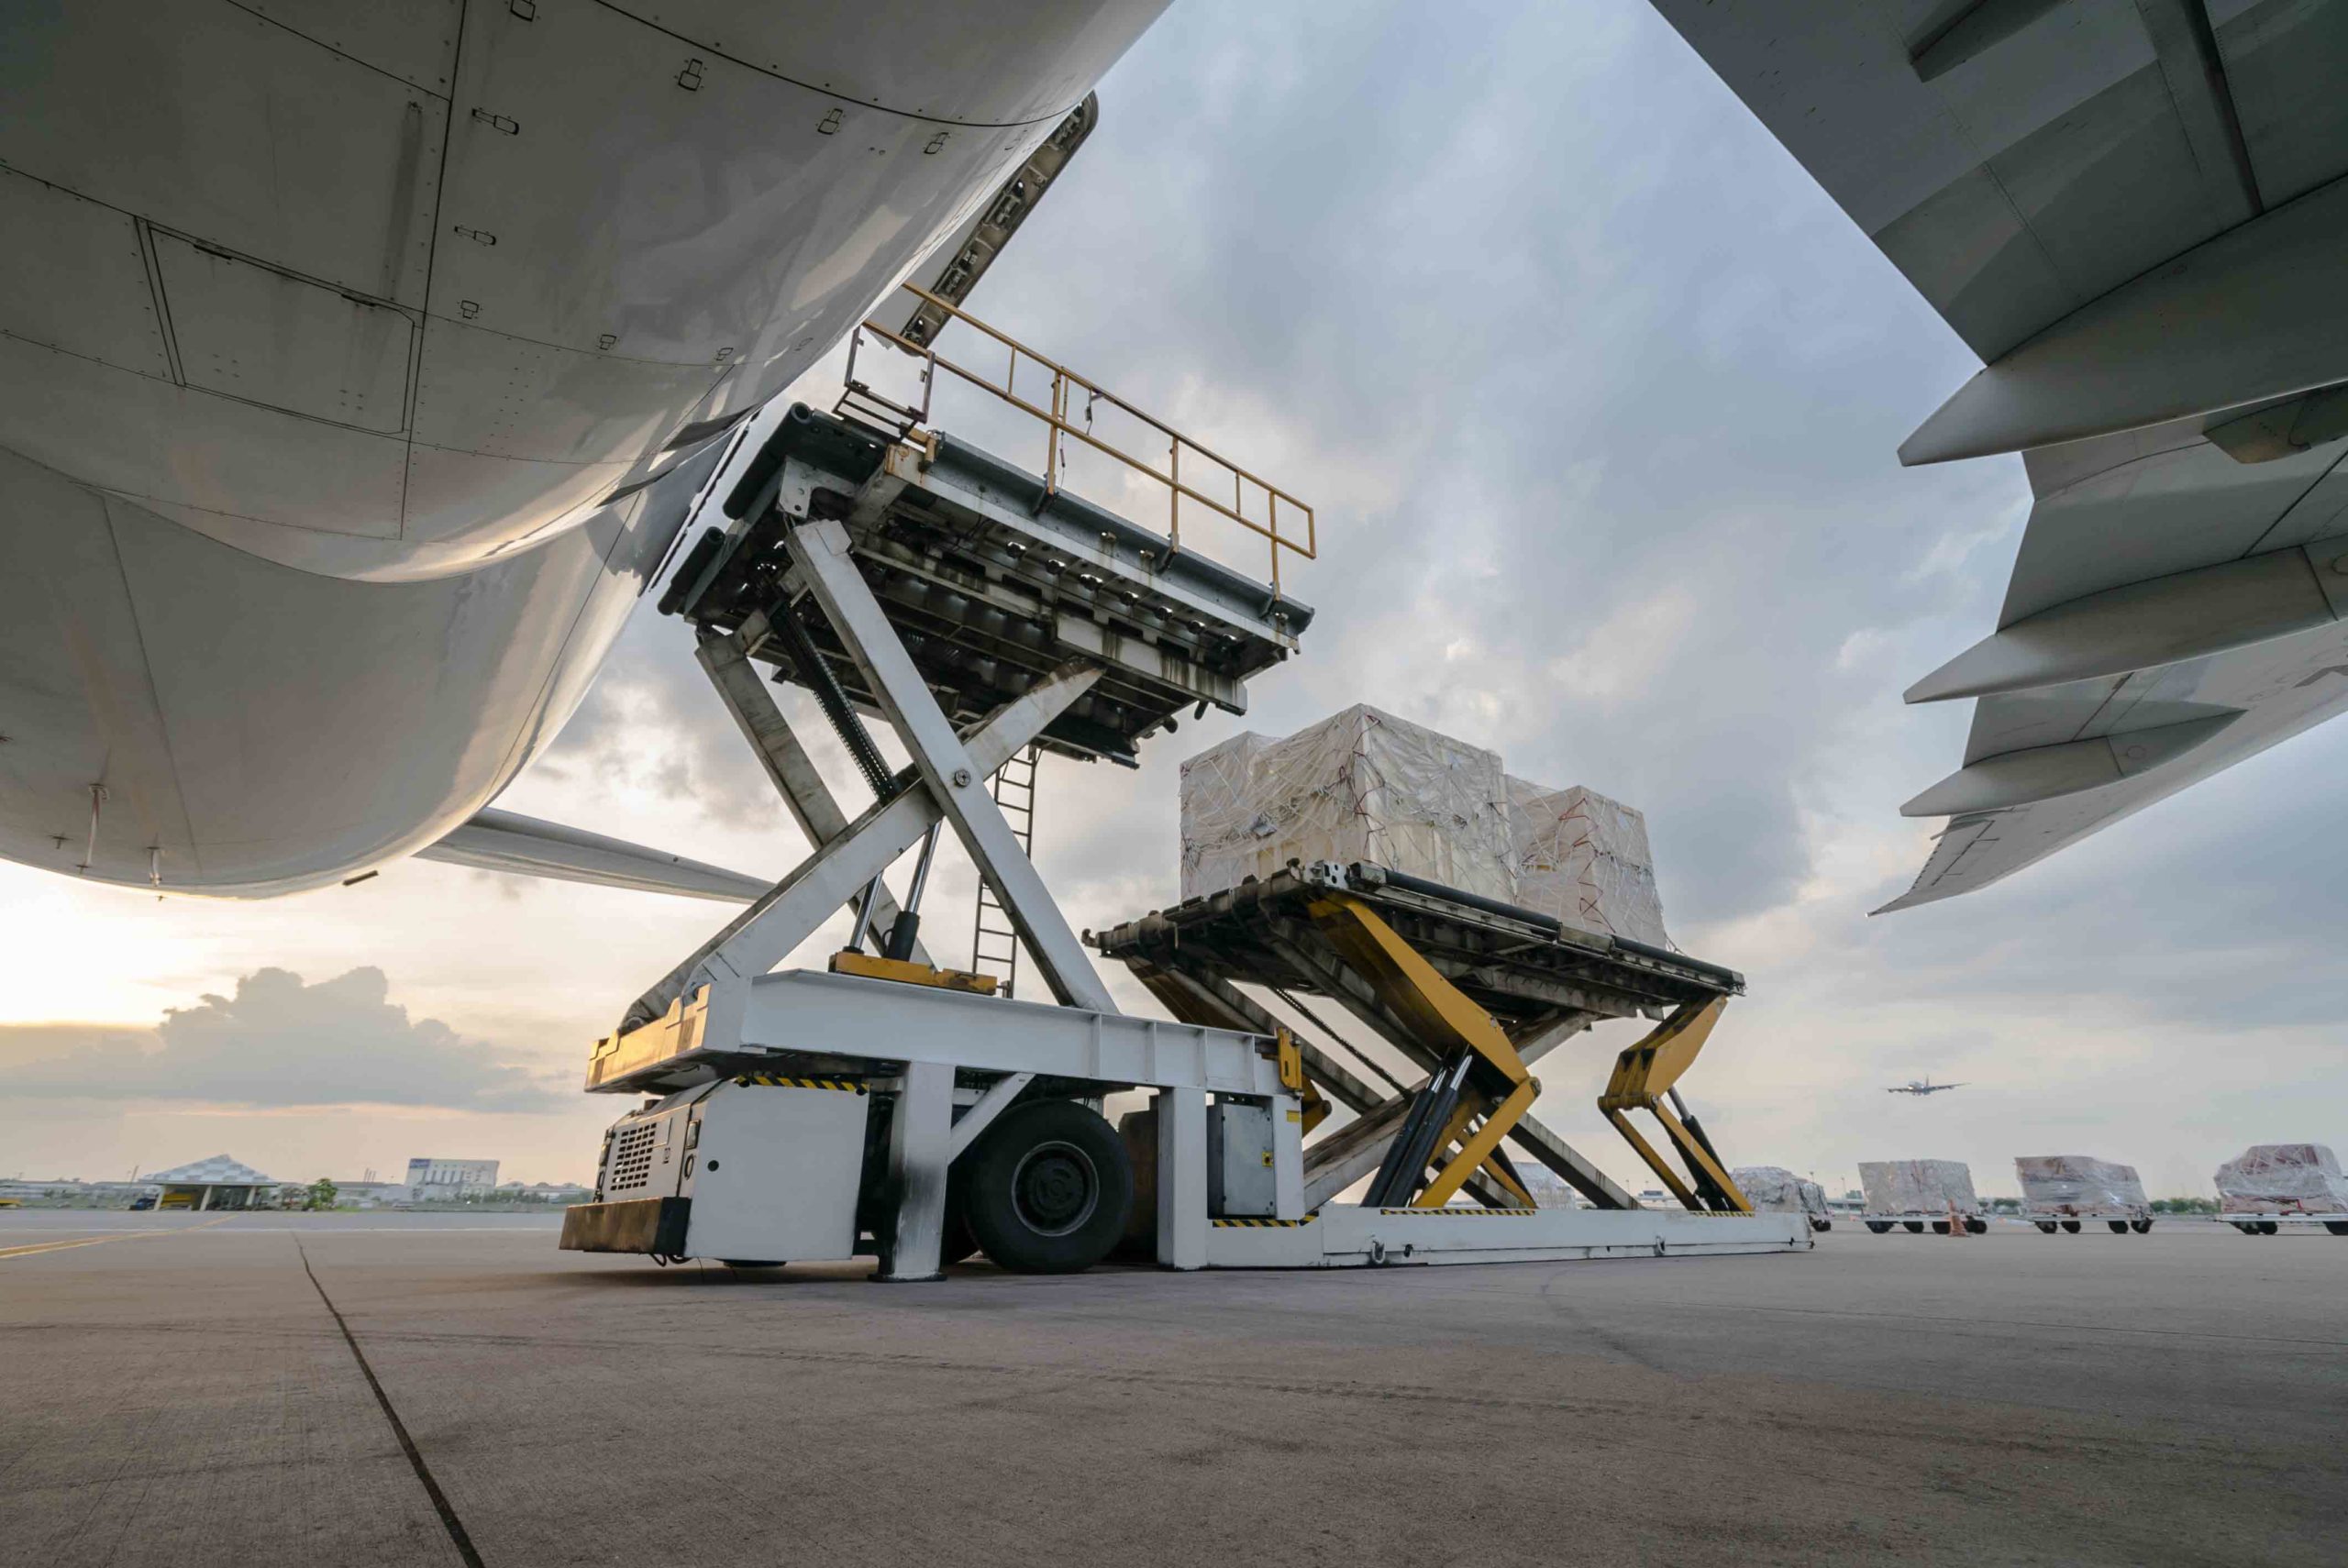 Loading Freight Into A Cargo Plane